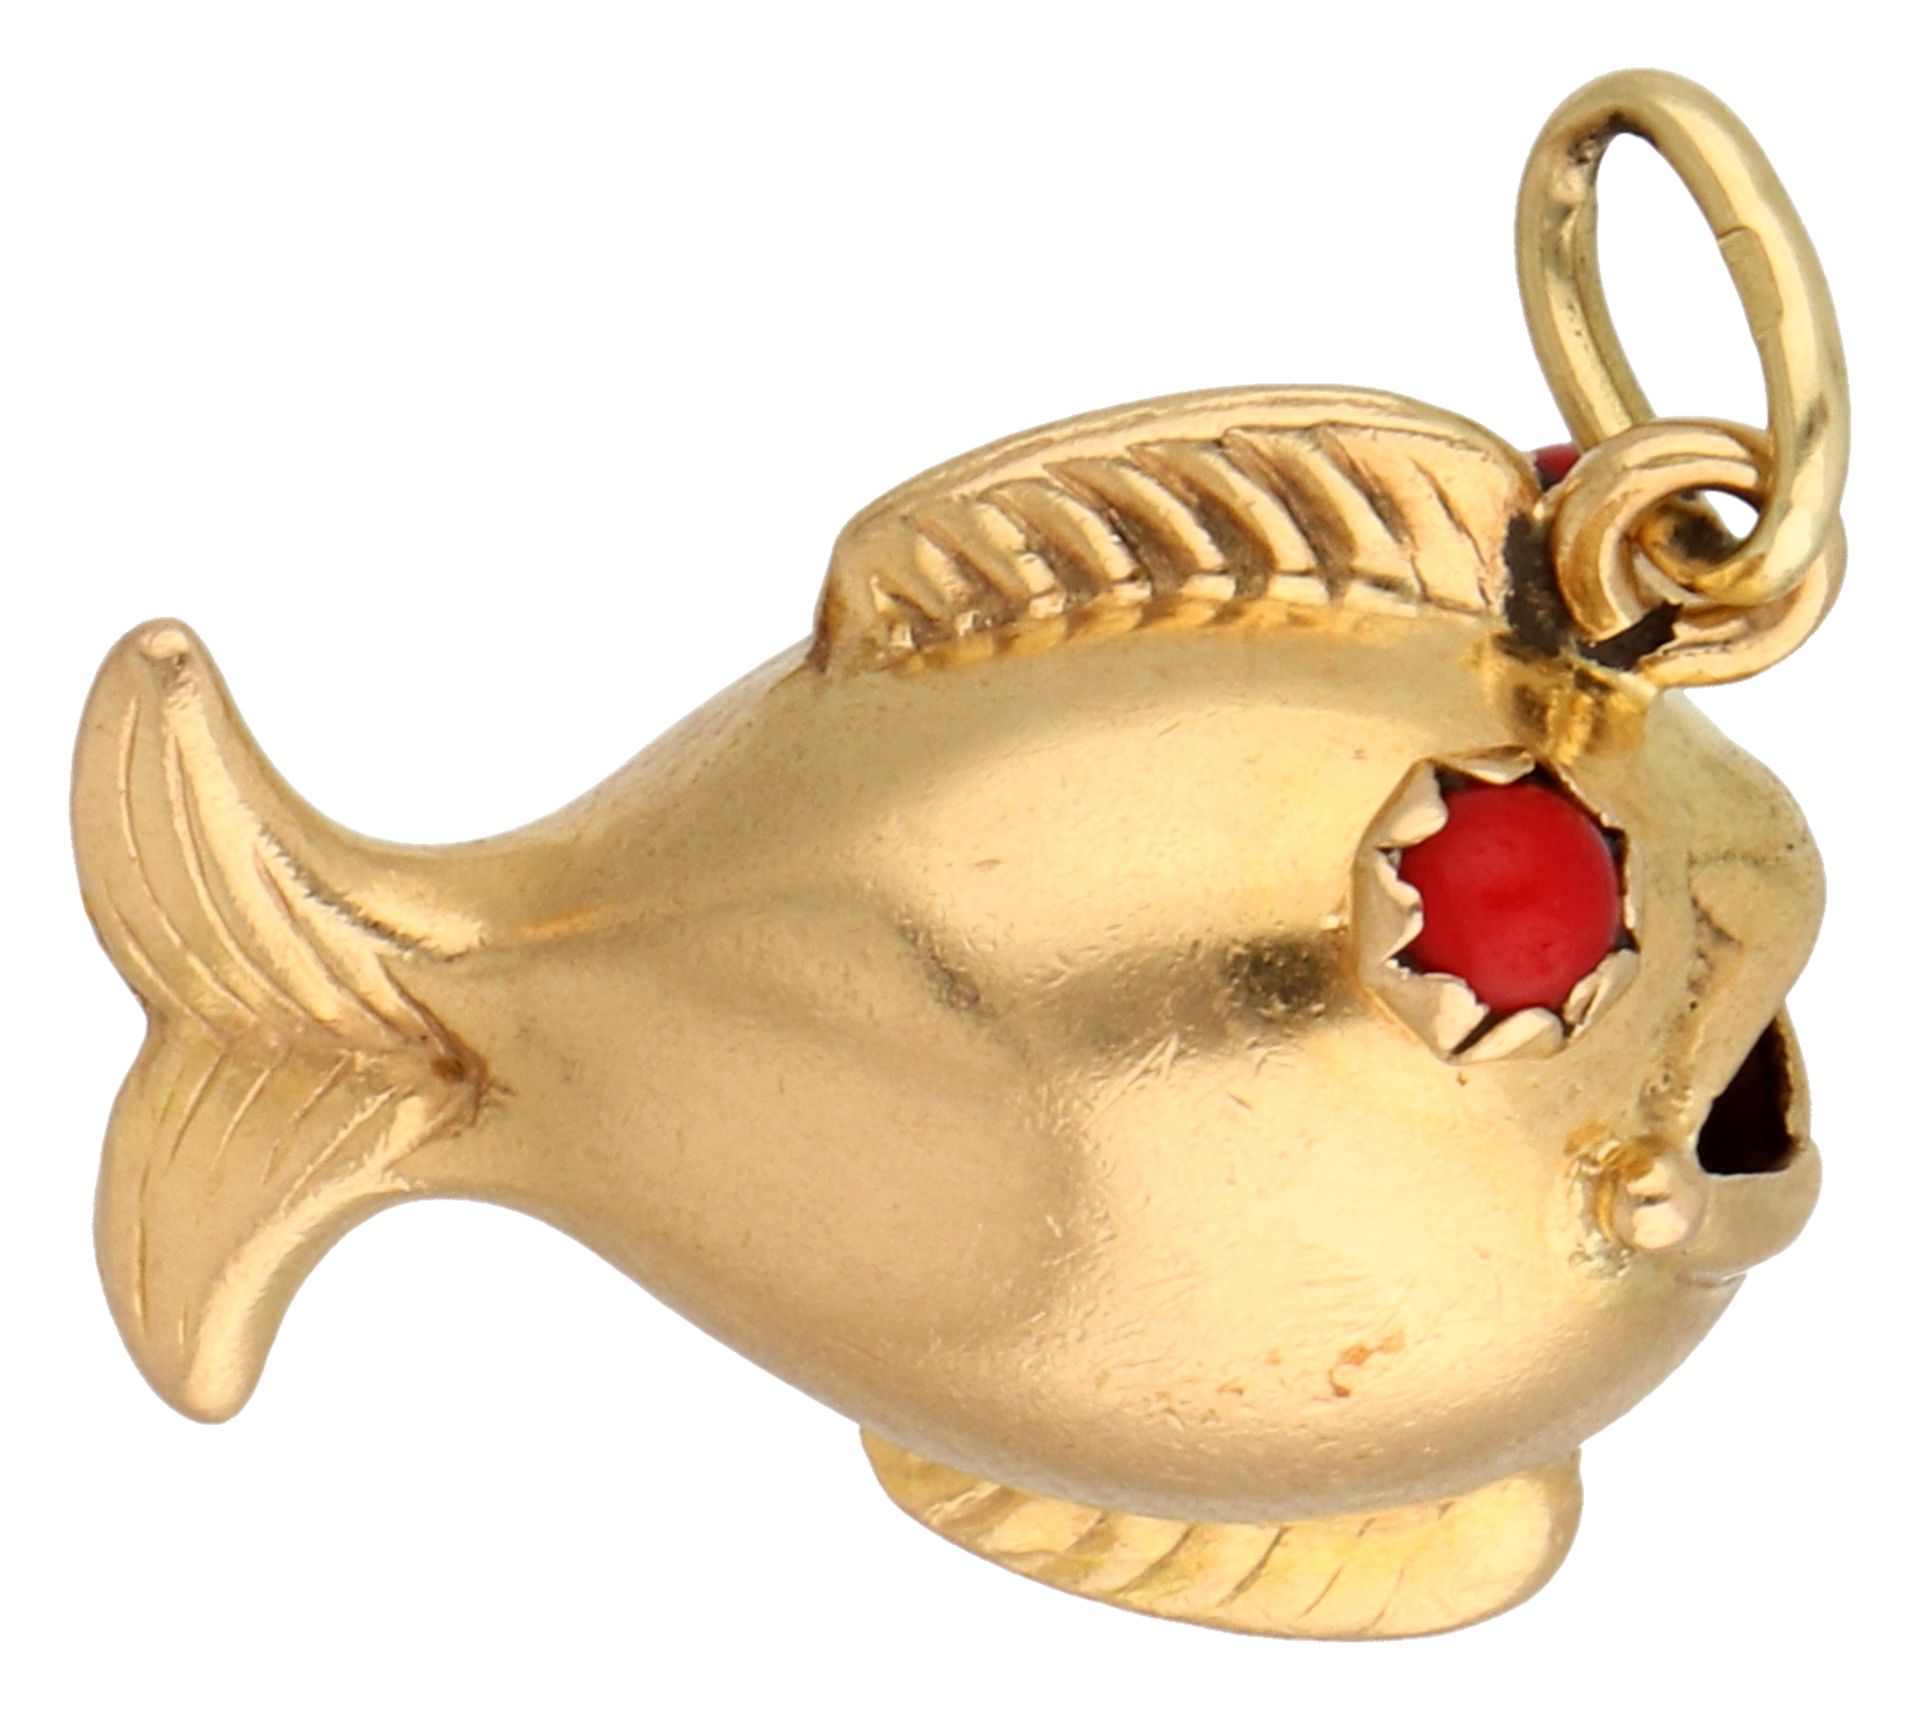 No reserve - 14K Yellow gold pendant of a puffer fish with red eyes. - Image 3 of 3